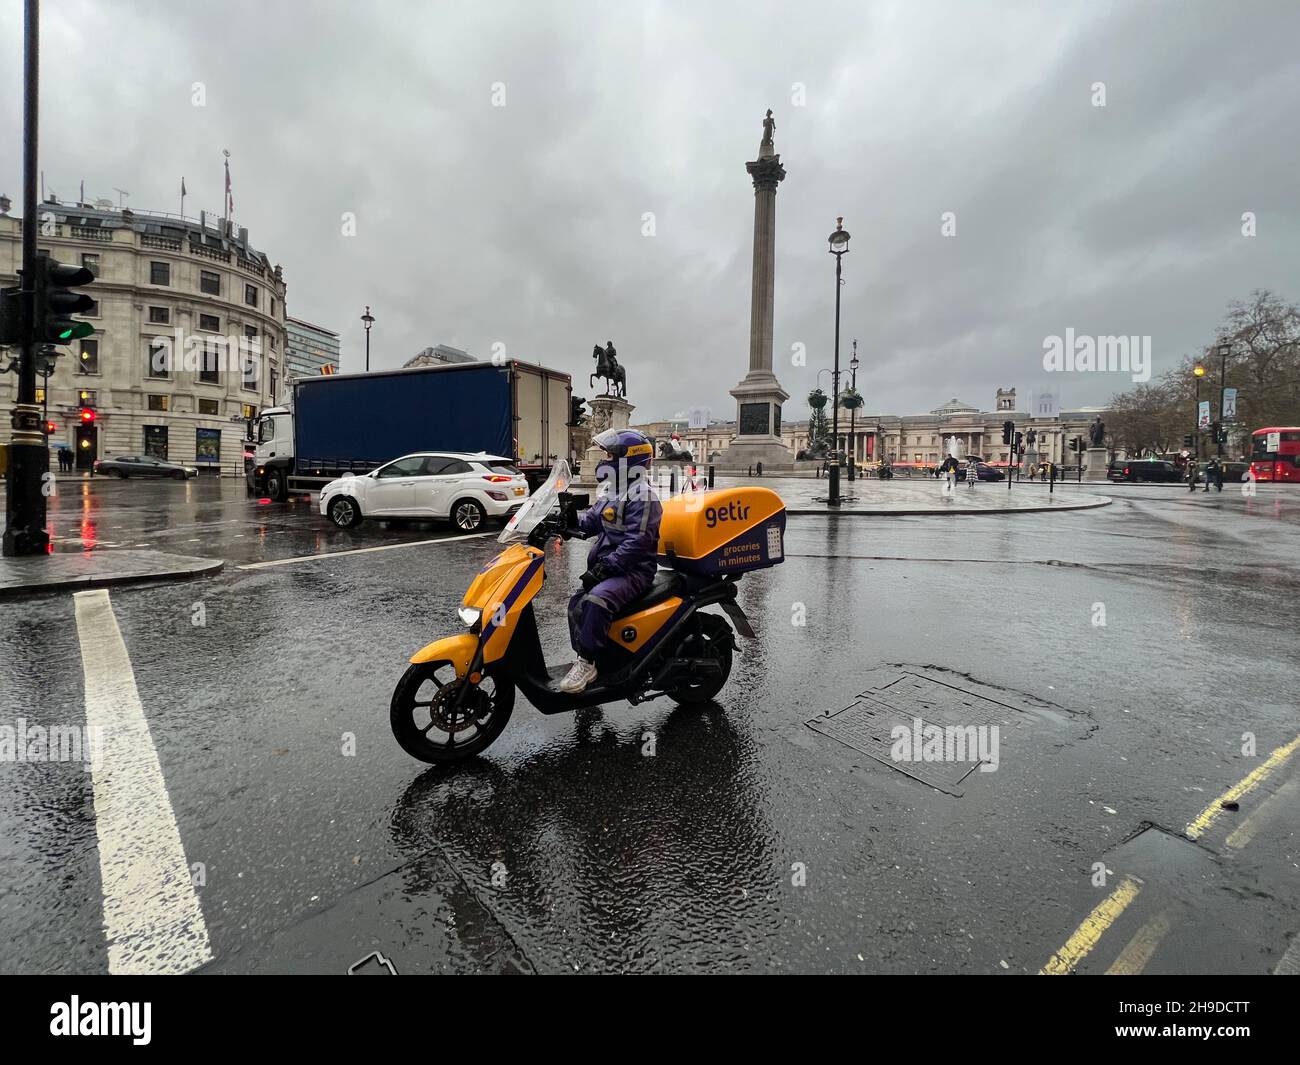 London, UK. 06th Dec, 2021. A driver for Getir delivery service sits on her scooter near Trafalgar Square in London on Dec. 6, 2021. Getir is an online grocery delivery platform that promises to deliver products within 10 minutes. Getir was started in Istanbul in 2015 and launched in London in January 2021. The start-up also has service in Amsterdam, Berlin, and Paris. (Photo by Samuel Rigelhaupt/Sipa USA) Credit: Sipa USA/Alamy Live News Stock Photo